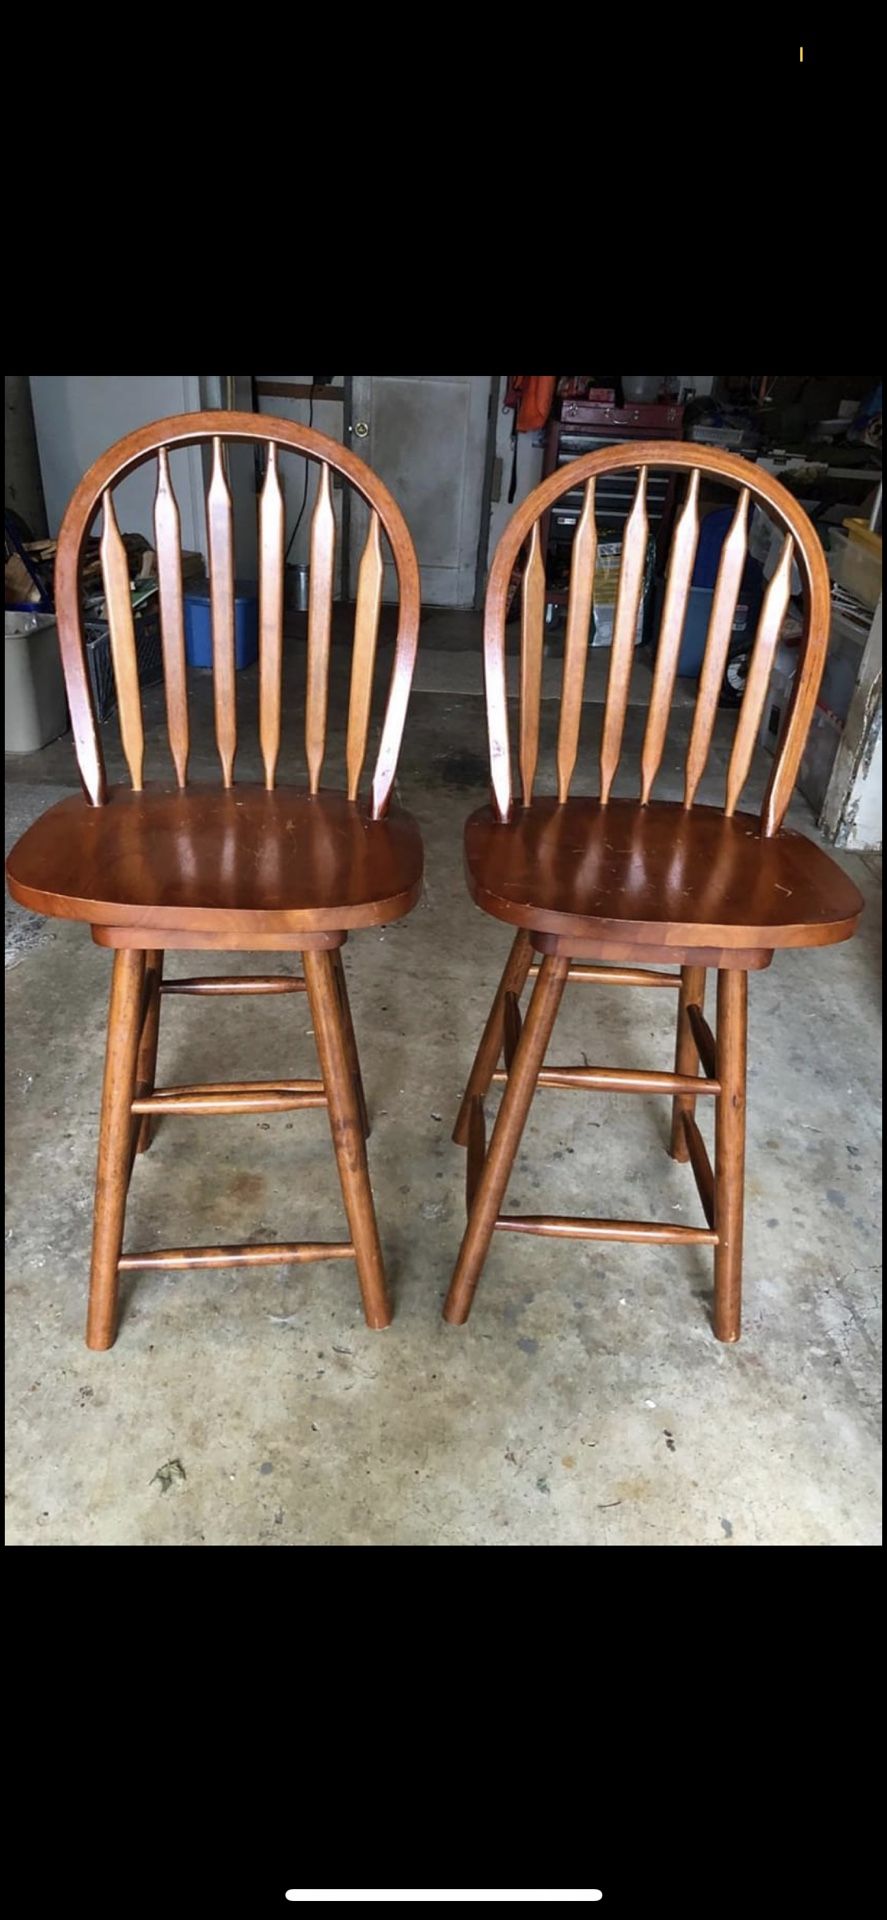 Wooden high rise chairs